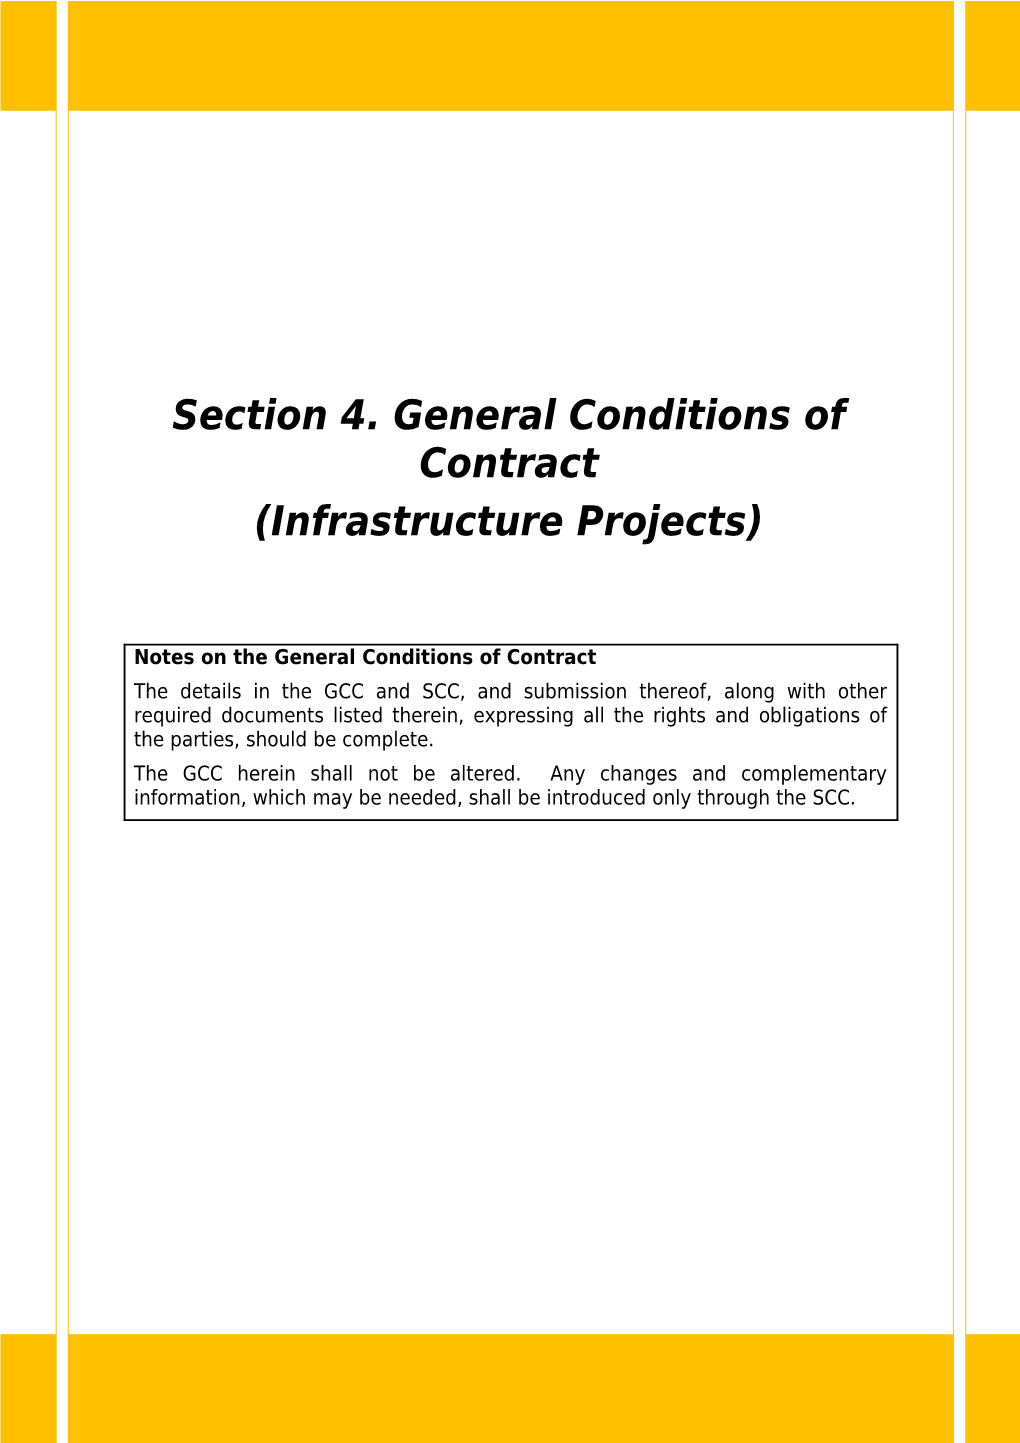 Section 4. General Conditions of Contract